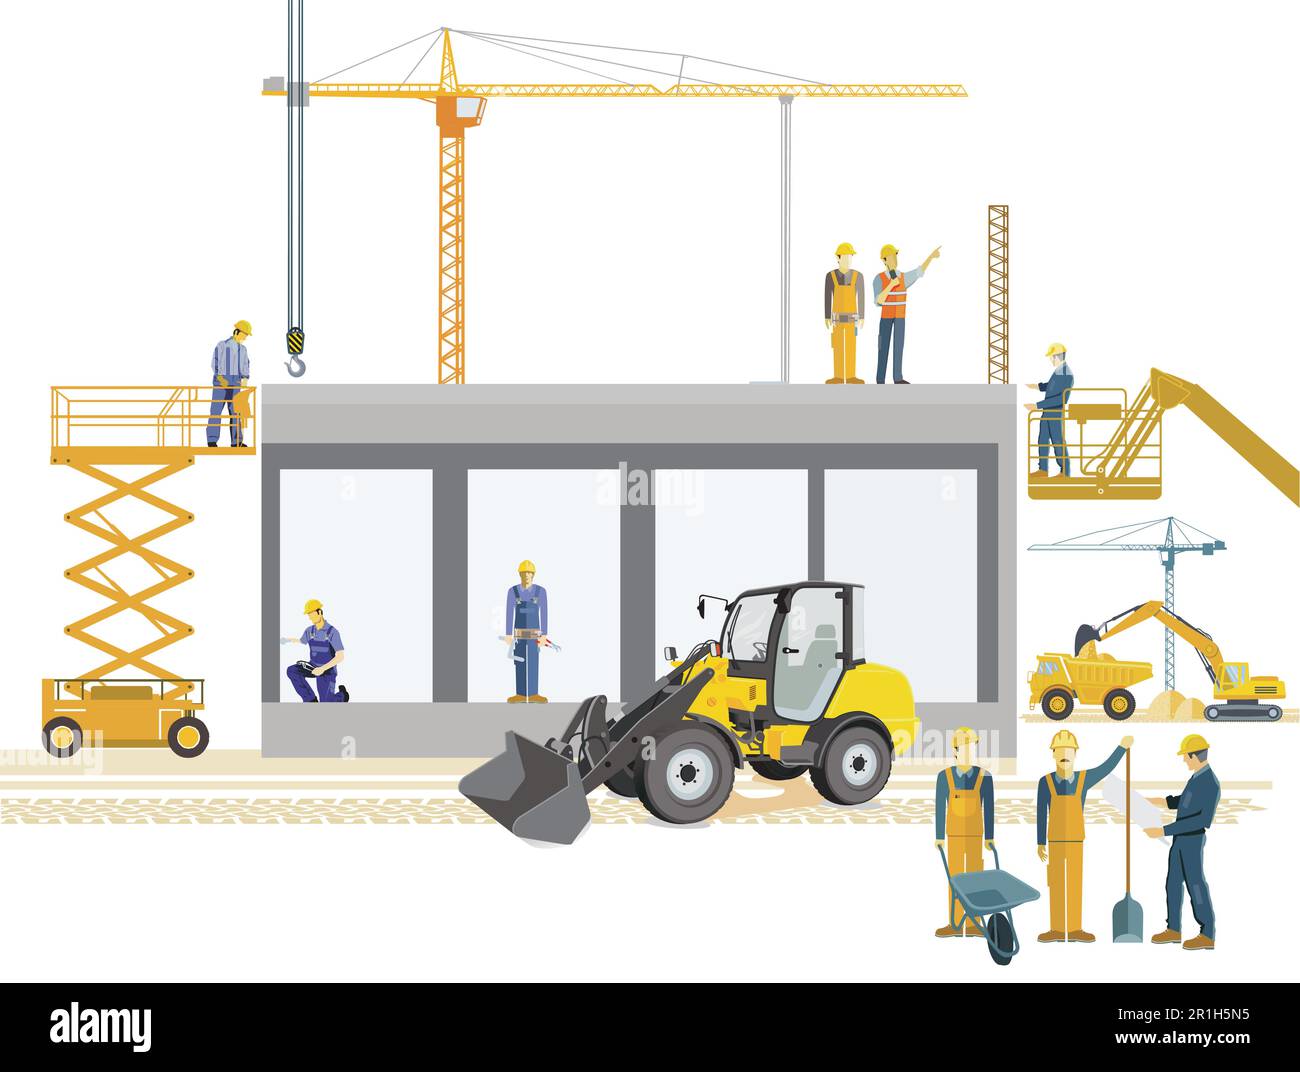 Construction site with architects, construction machines and heavy trucks, illustration Stock Vector